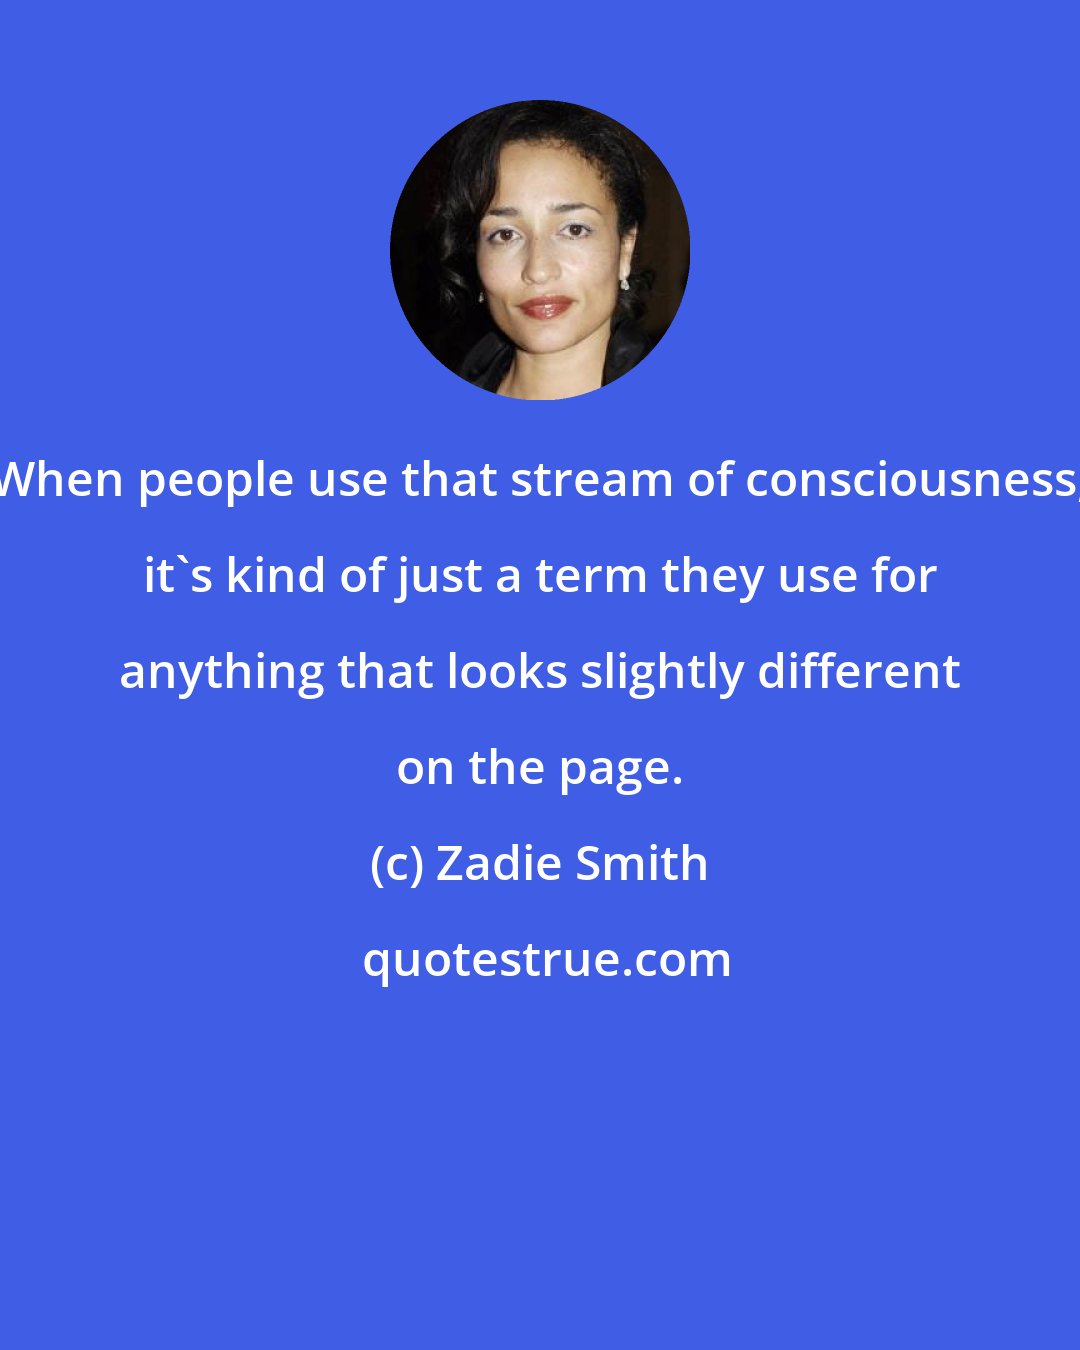 Zadie Smith: When people use that stream of consciousness, it's kind of just a term they use for anything that looks slightly different on the page.